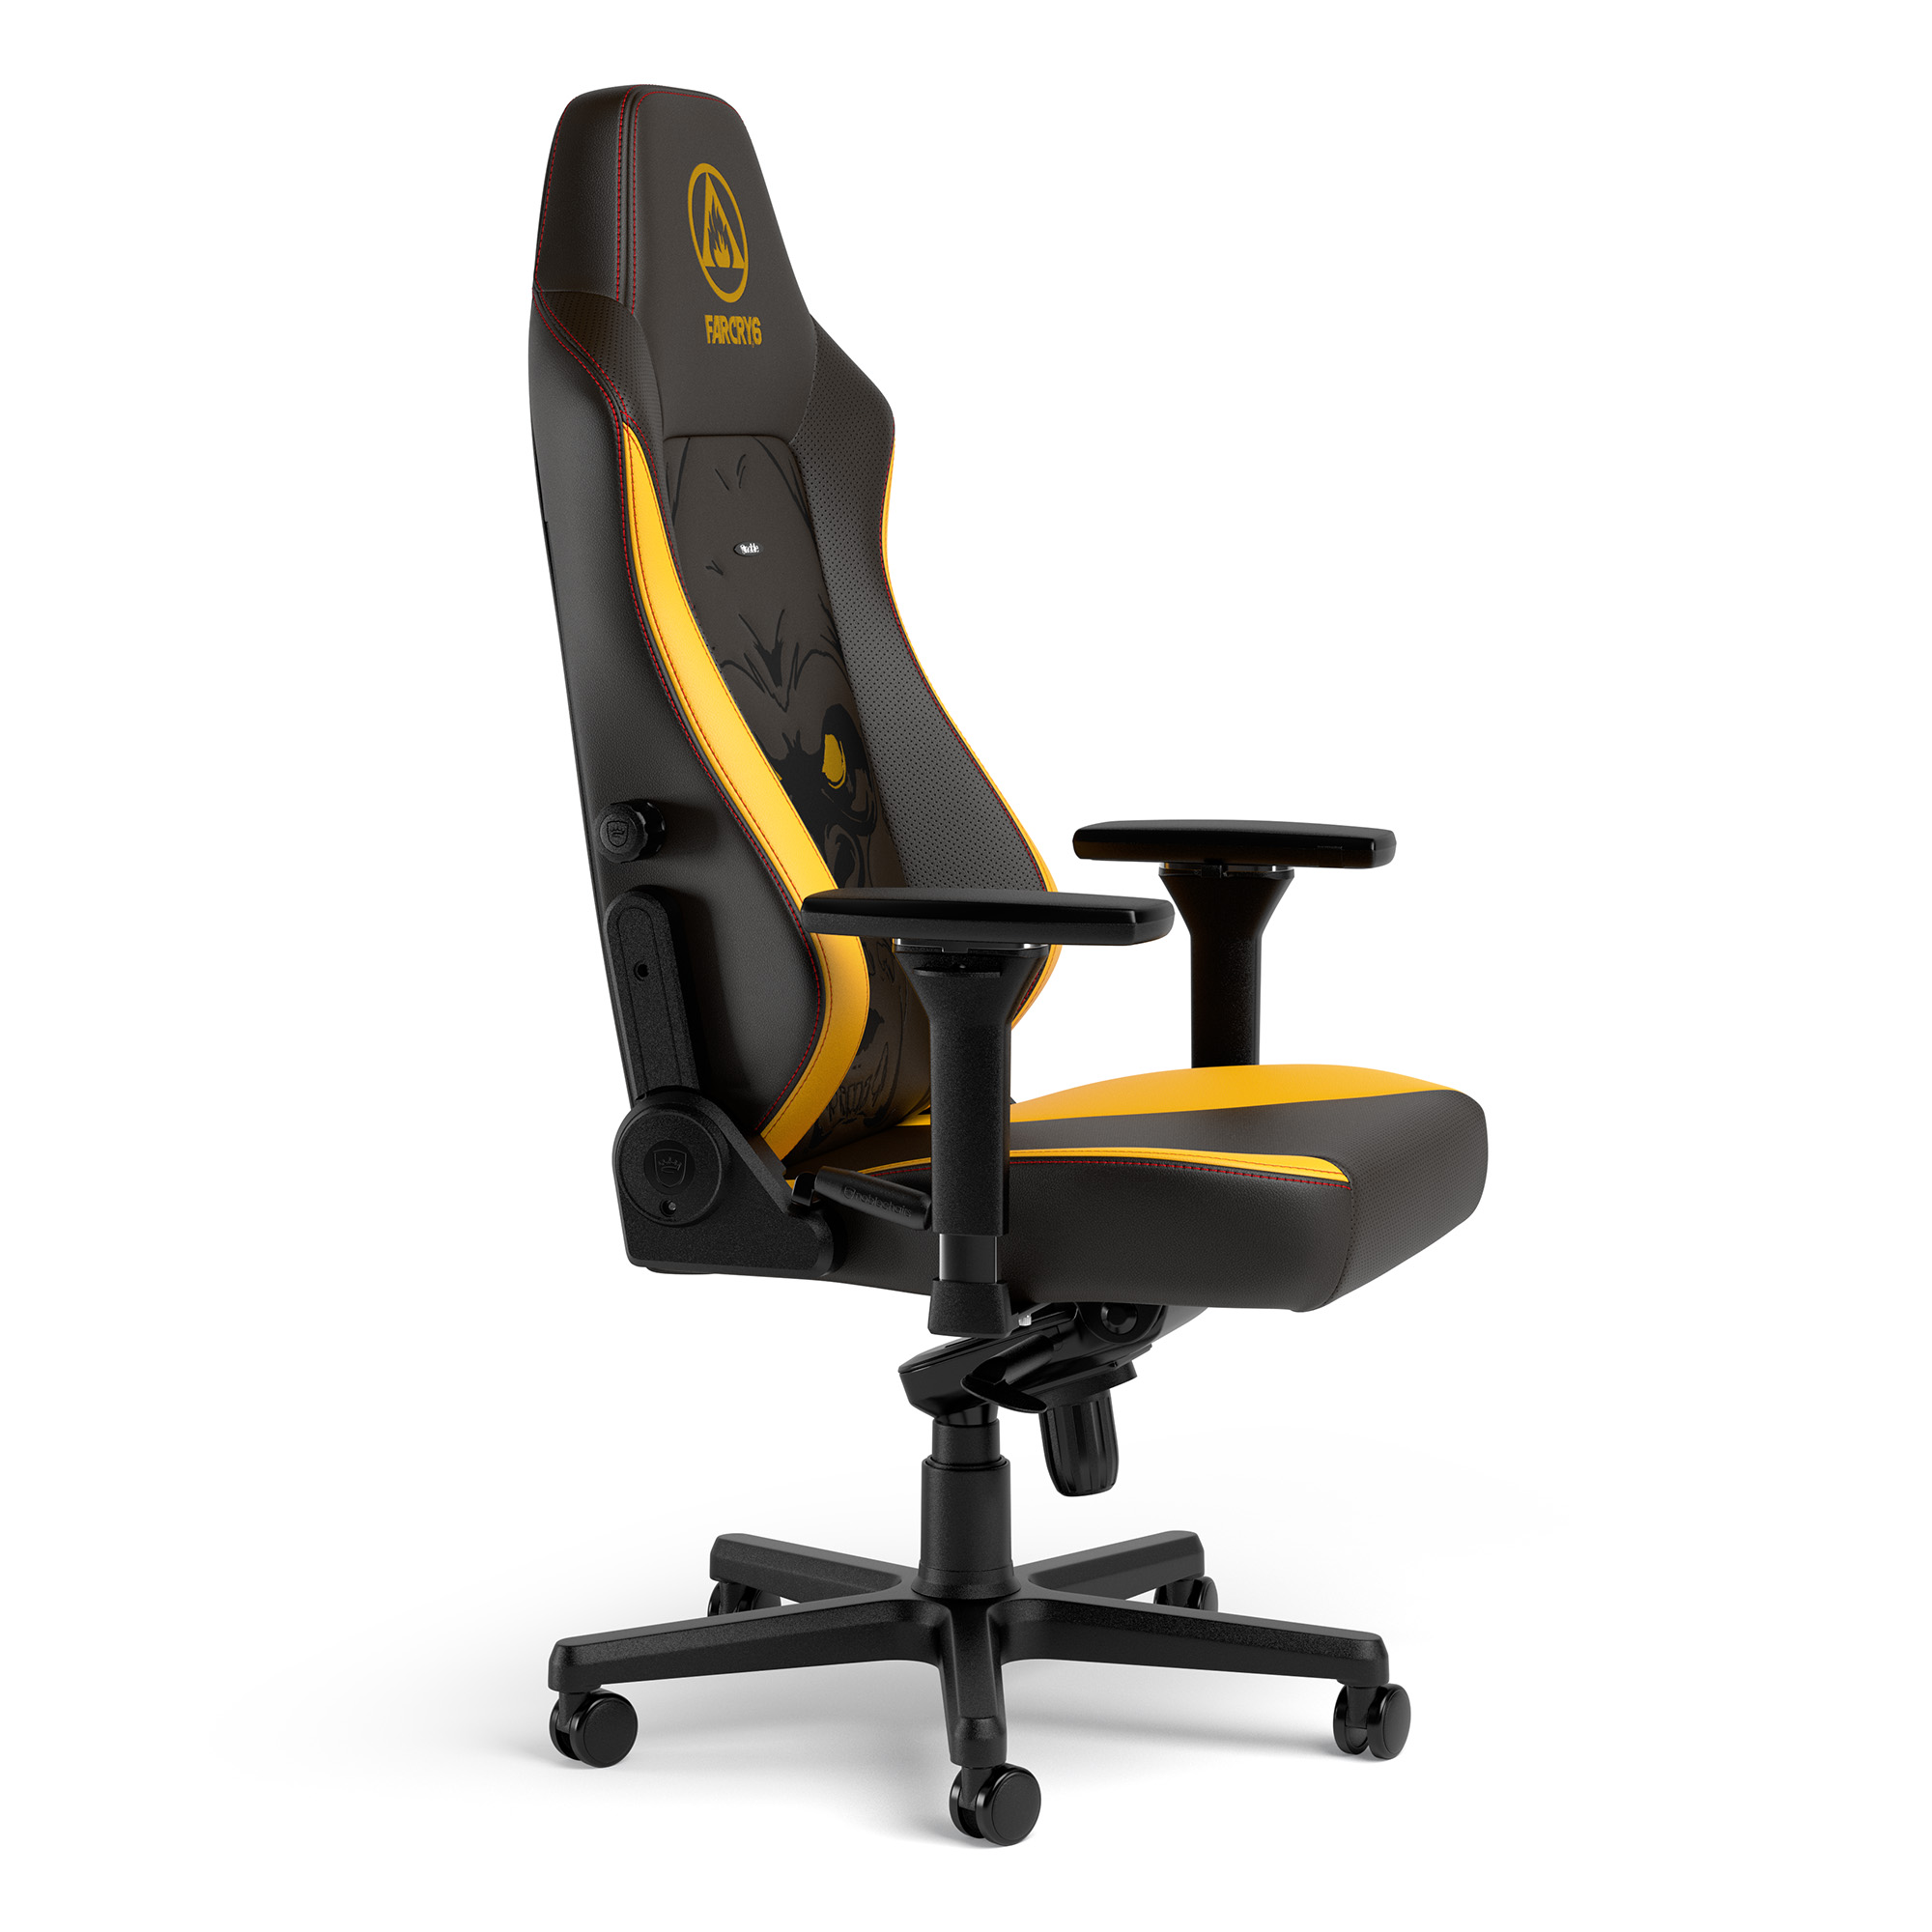  - B Grade noblechairs HERO Gaming Chair - Far Cry 6 Edition